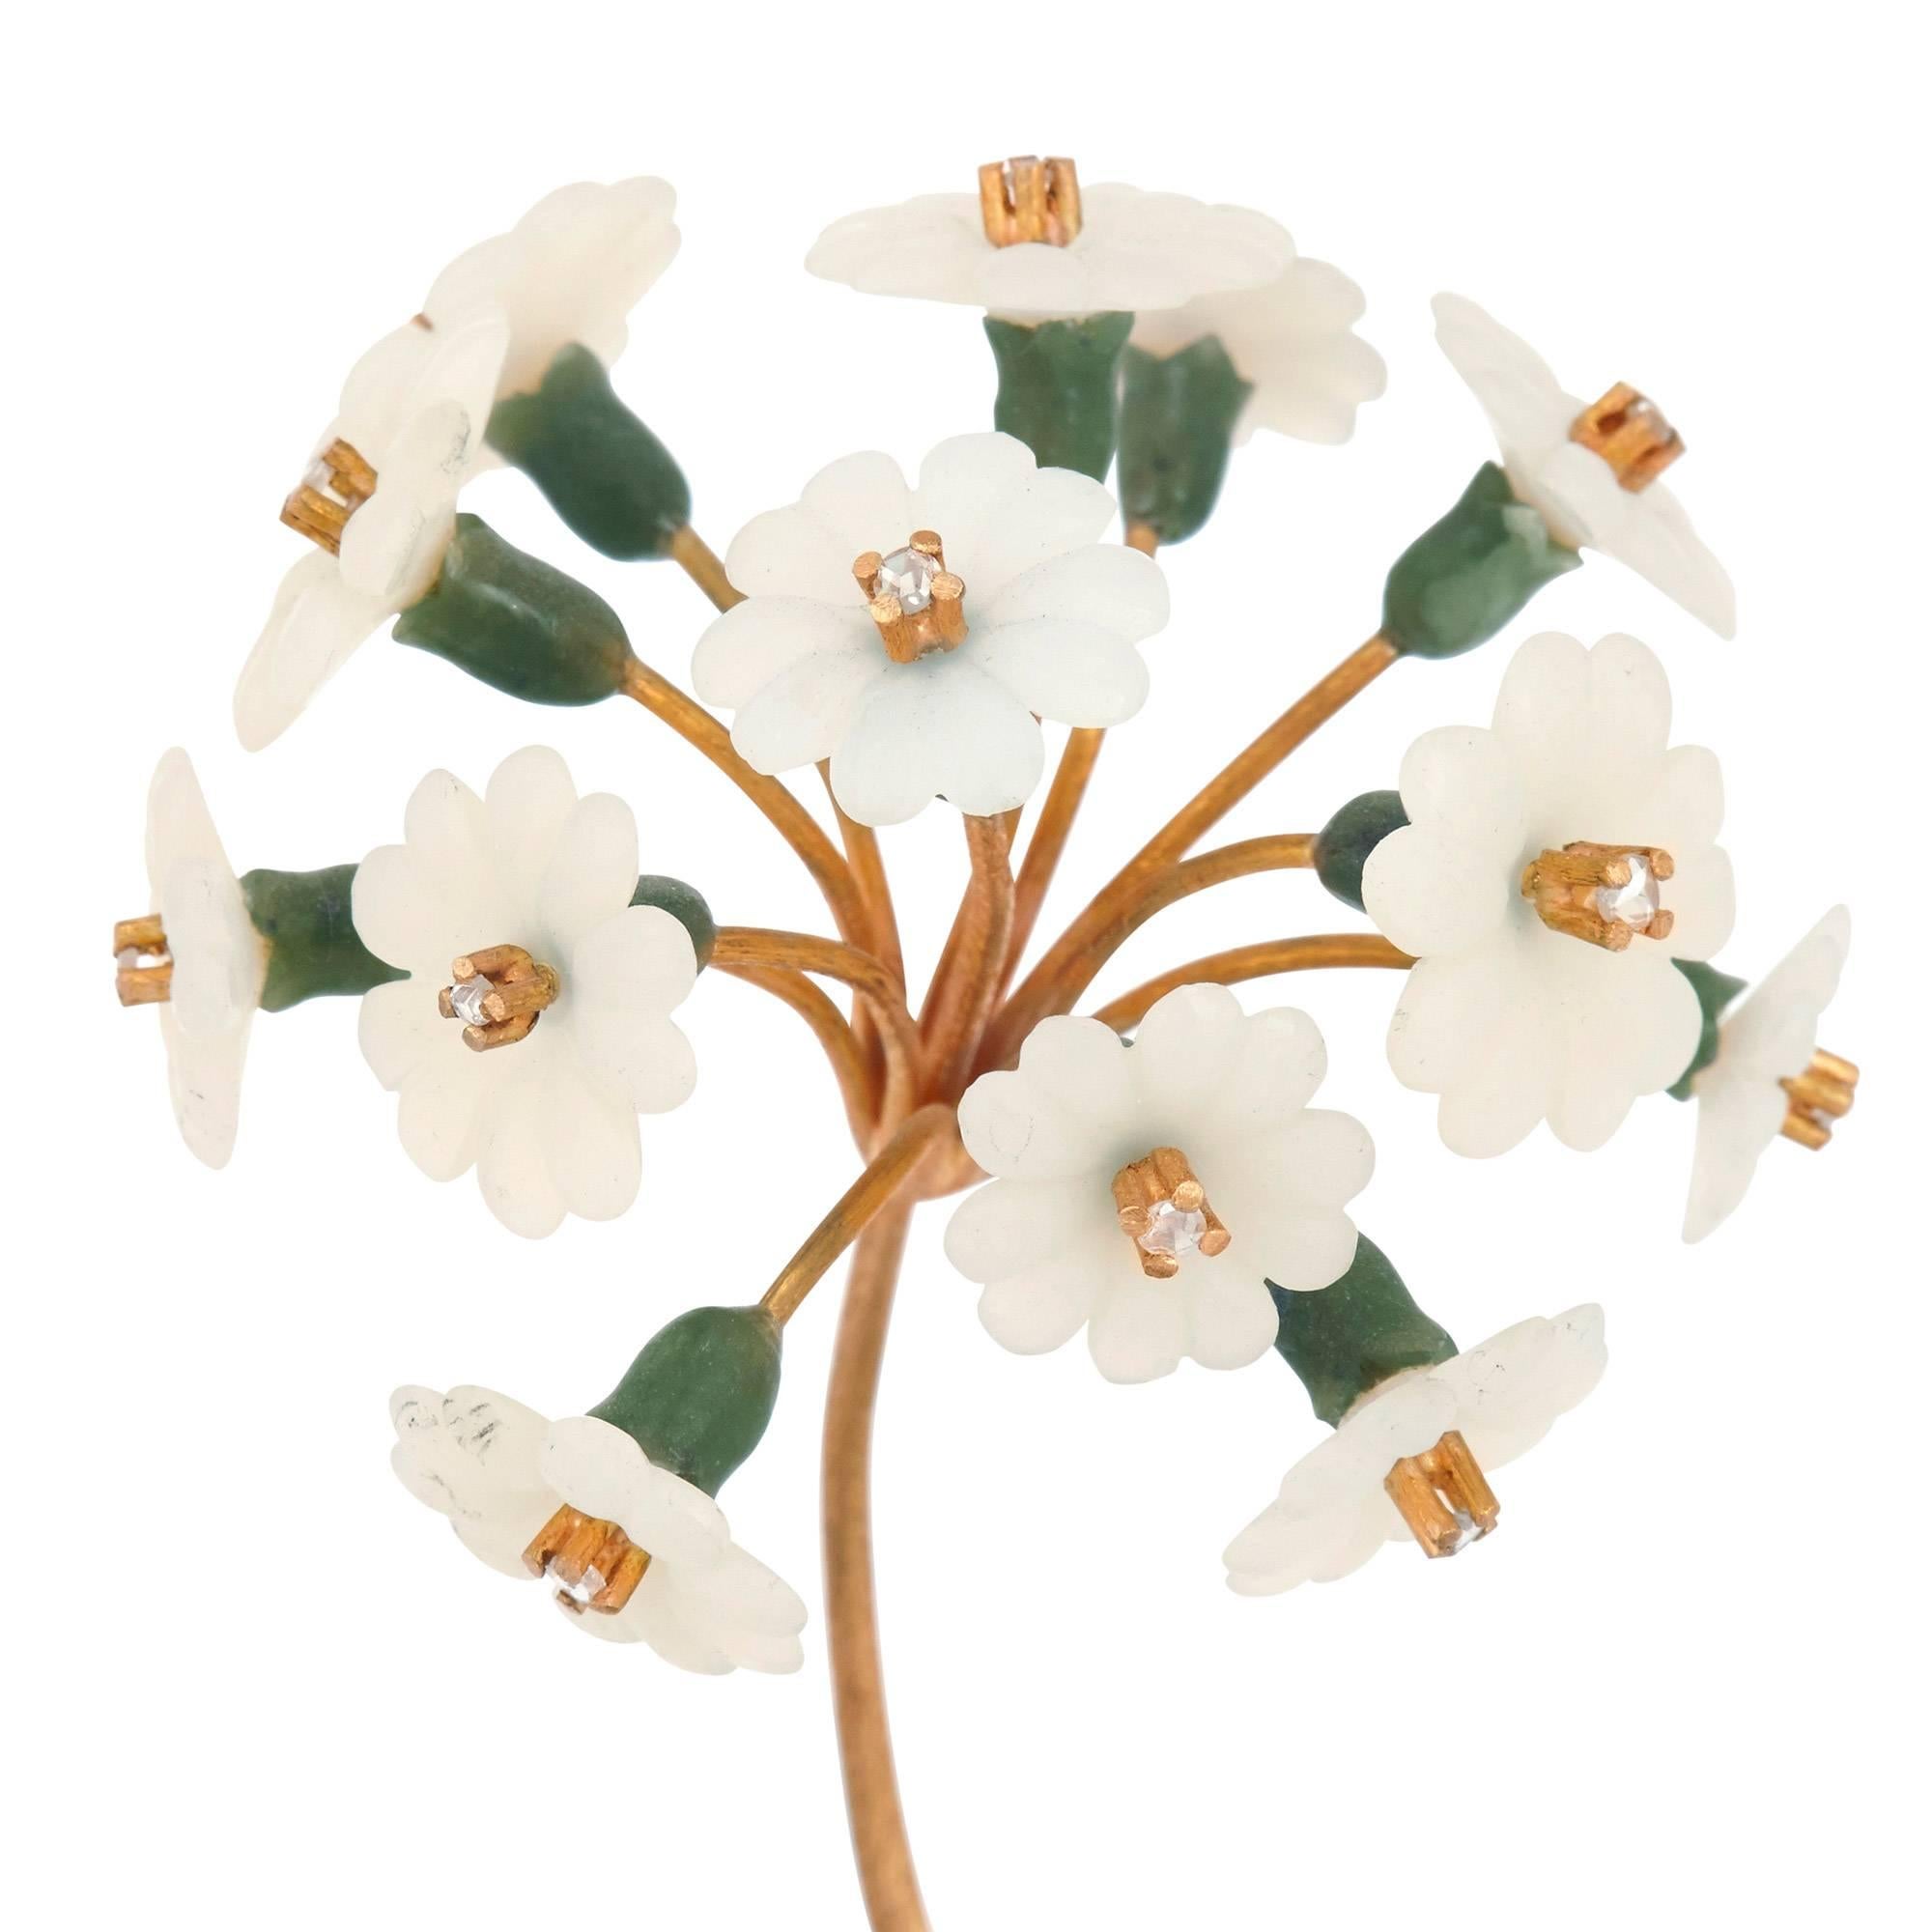 This delicate flower model is exquisitely crafted from the finest materials. The model features a cluster of small white, hardstone flowers, with diamond stigmata, set onto a central gold stem with leaves formed of green nephrite. The flower stands